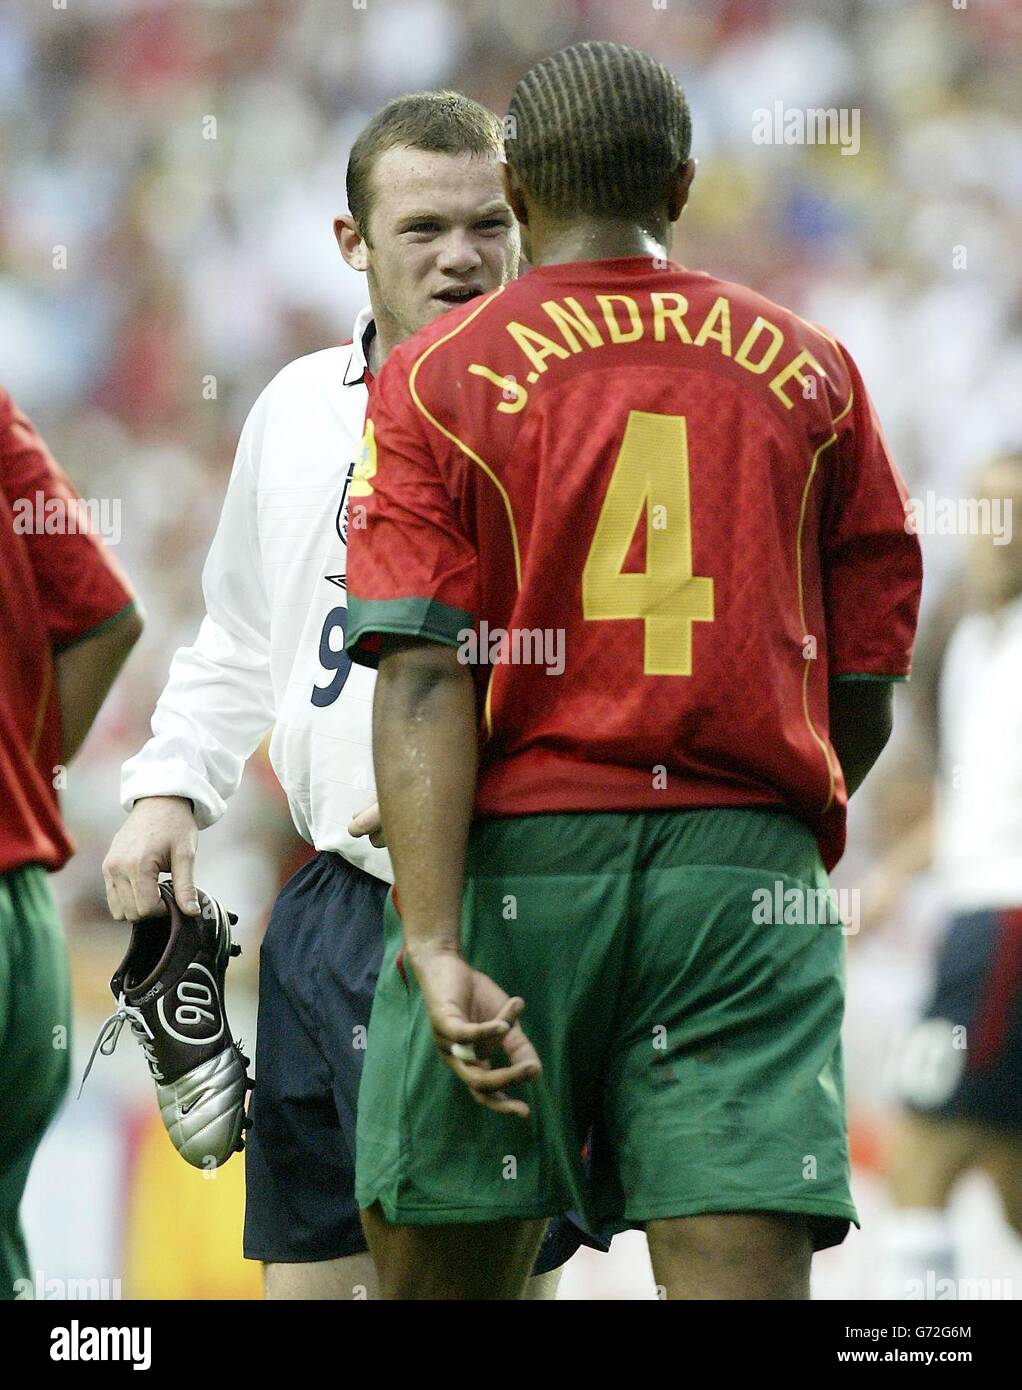 England's Wayne Rooney confronts Portugal's Jorge Andrade, after being injured, during the Euro 2004 quarter-final match at the Estadio de Luz, Lisbon, Portugal. Stock Photo